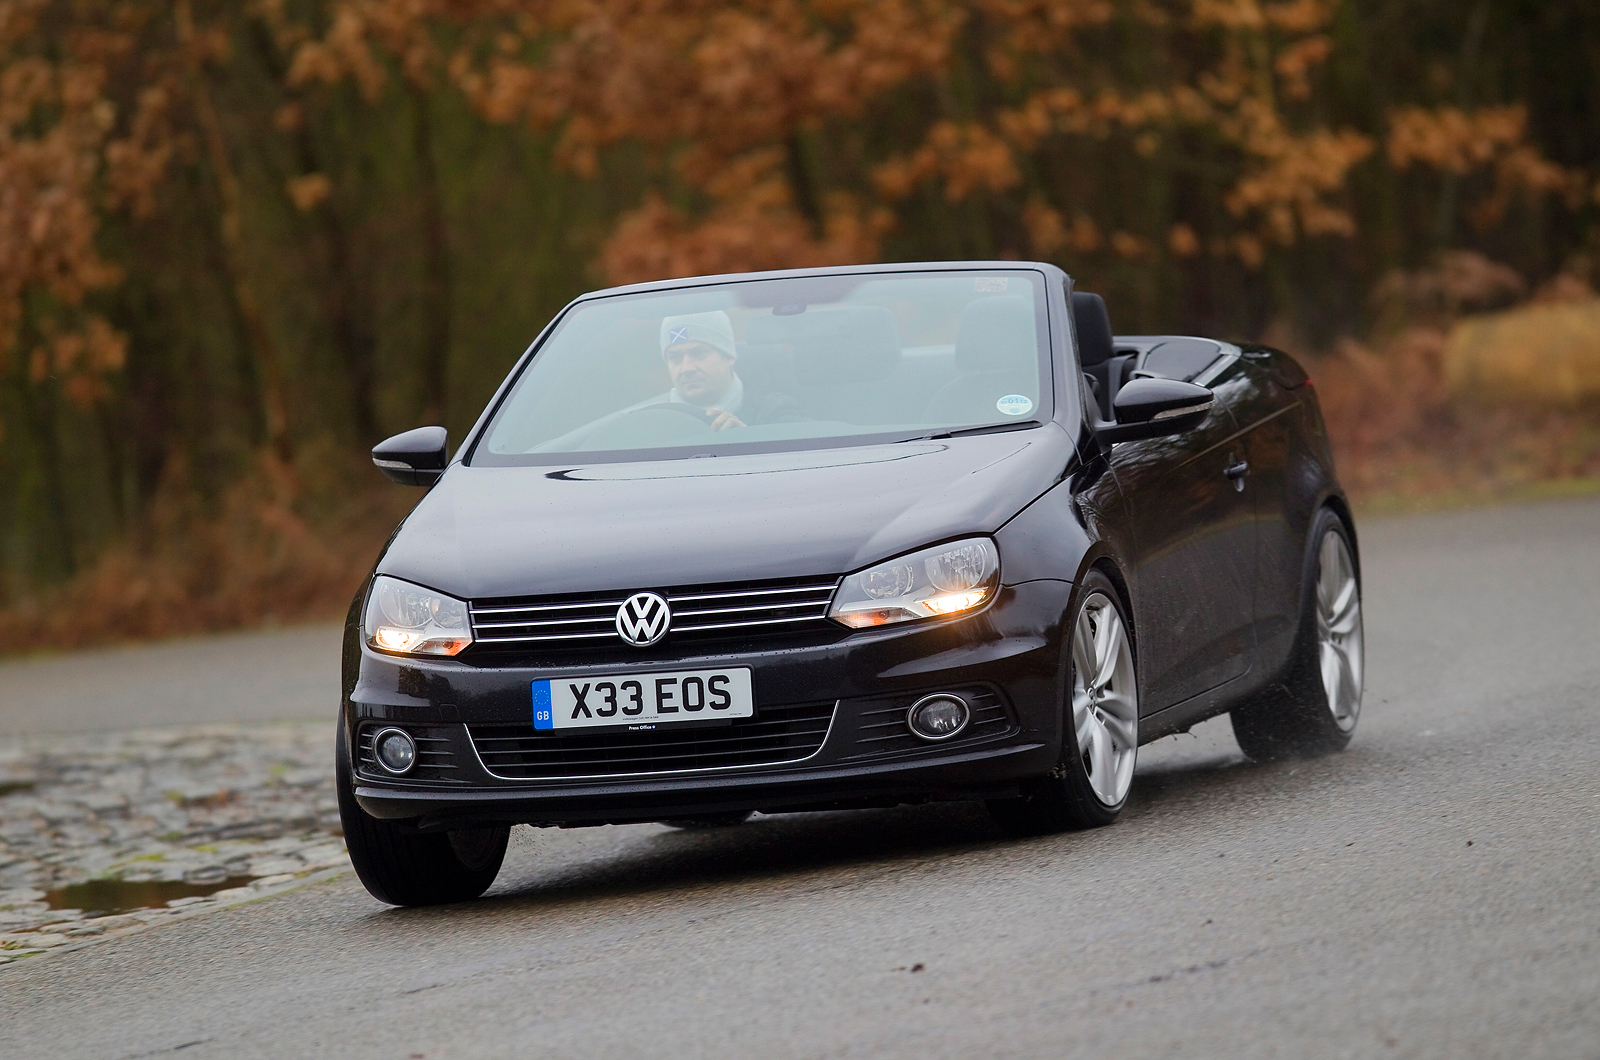 Used Volkswagen Eos 2006-2014 review